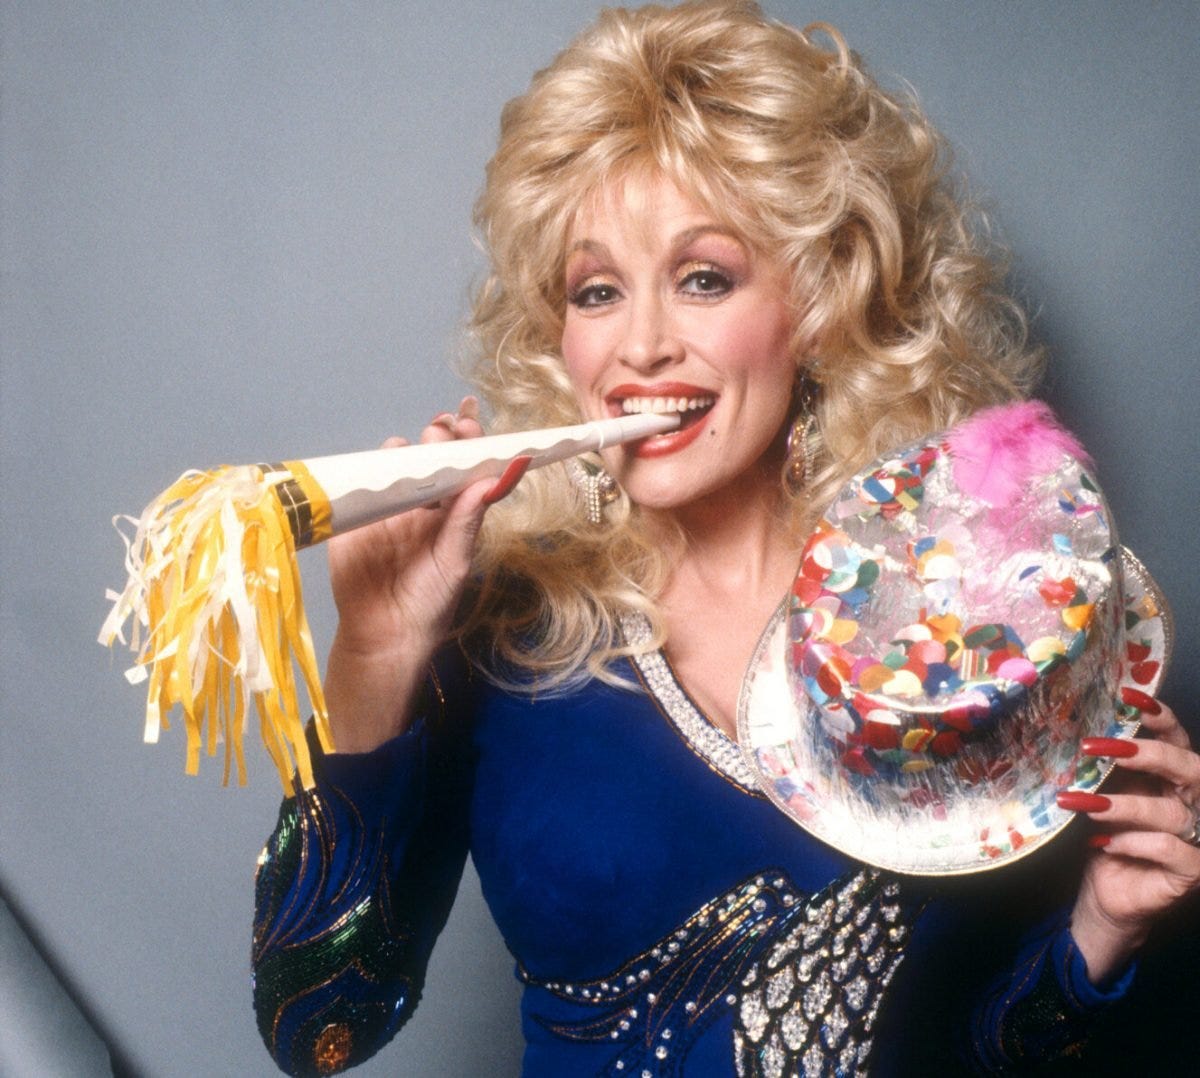 Image of Dolly--a woman smilling, holding a noisemaker to her mouth and a bright derby party hat. She wears a big blonde wig and is smiling